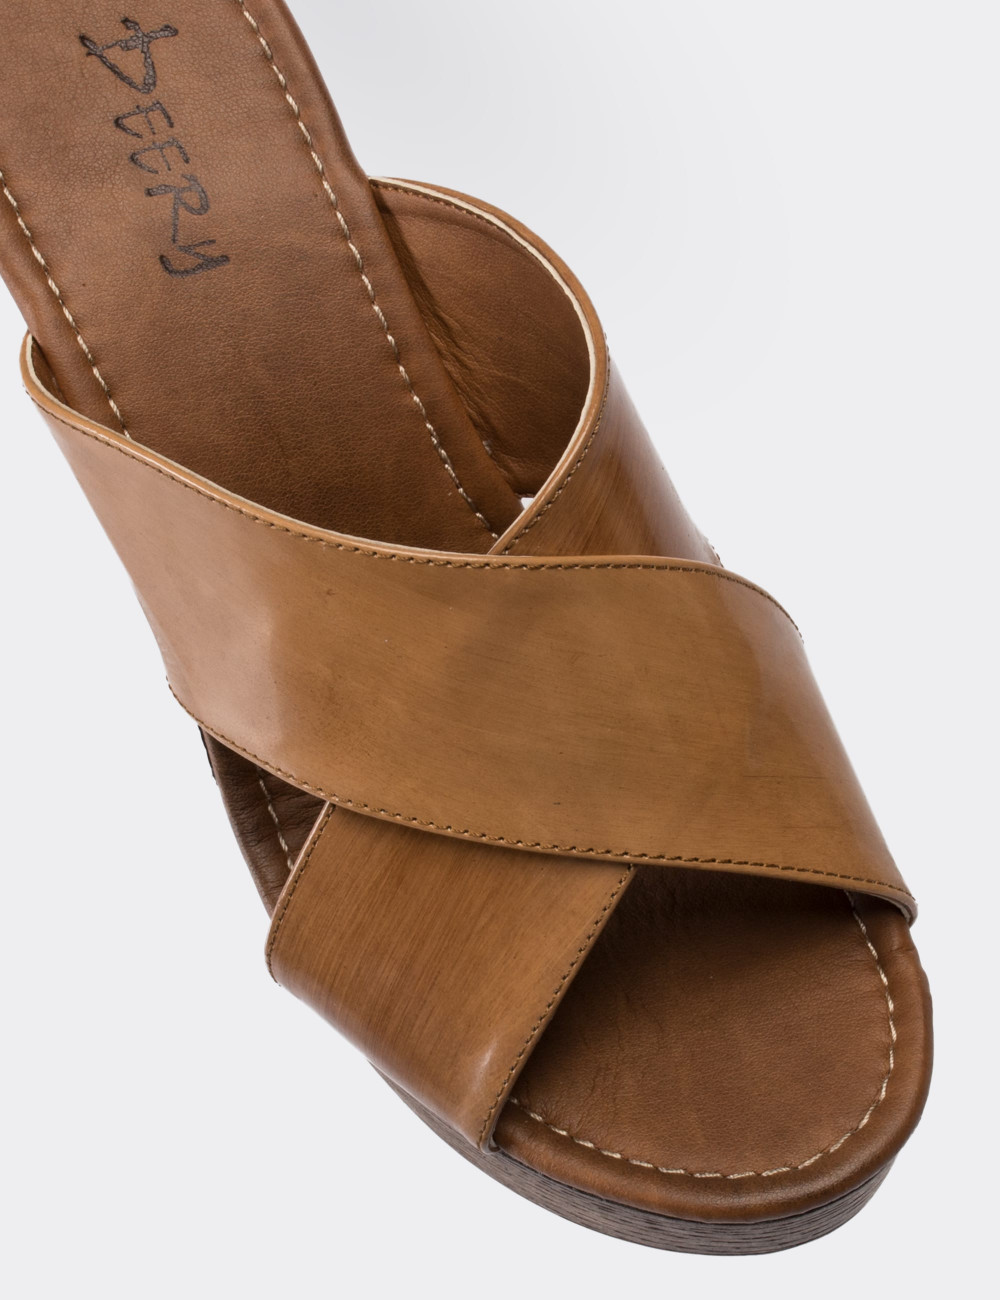 Brown  Leather Wedge Sandals - 02050ZKHVC01